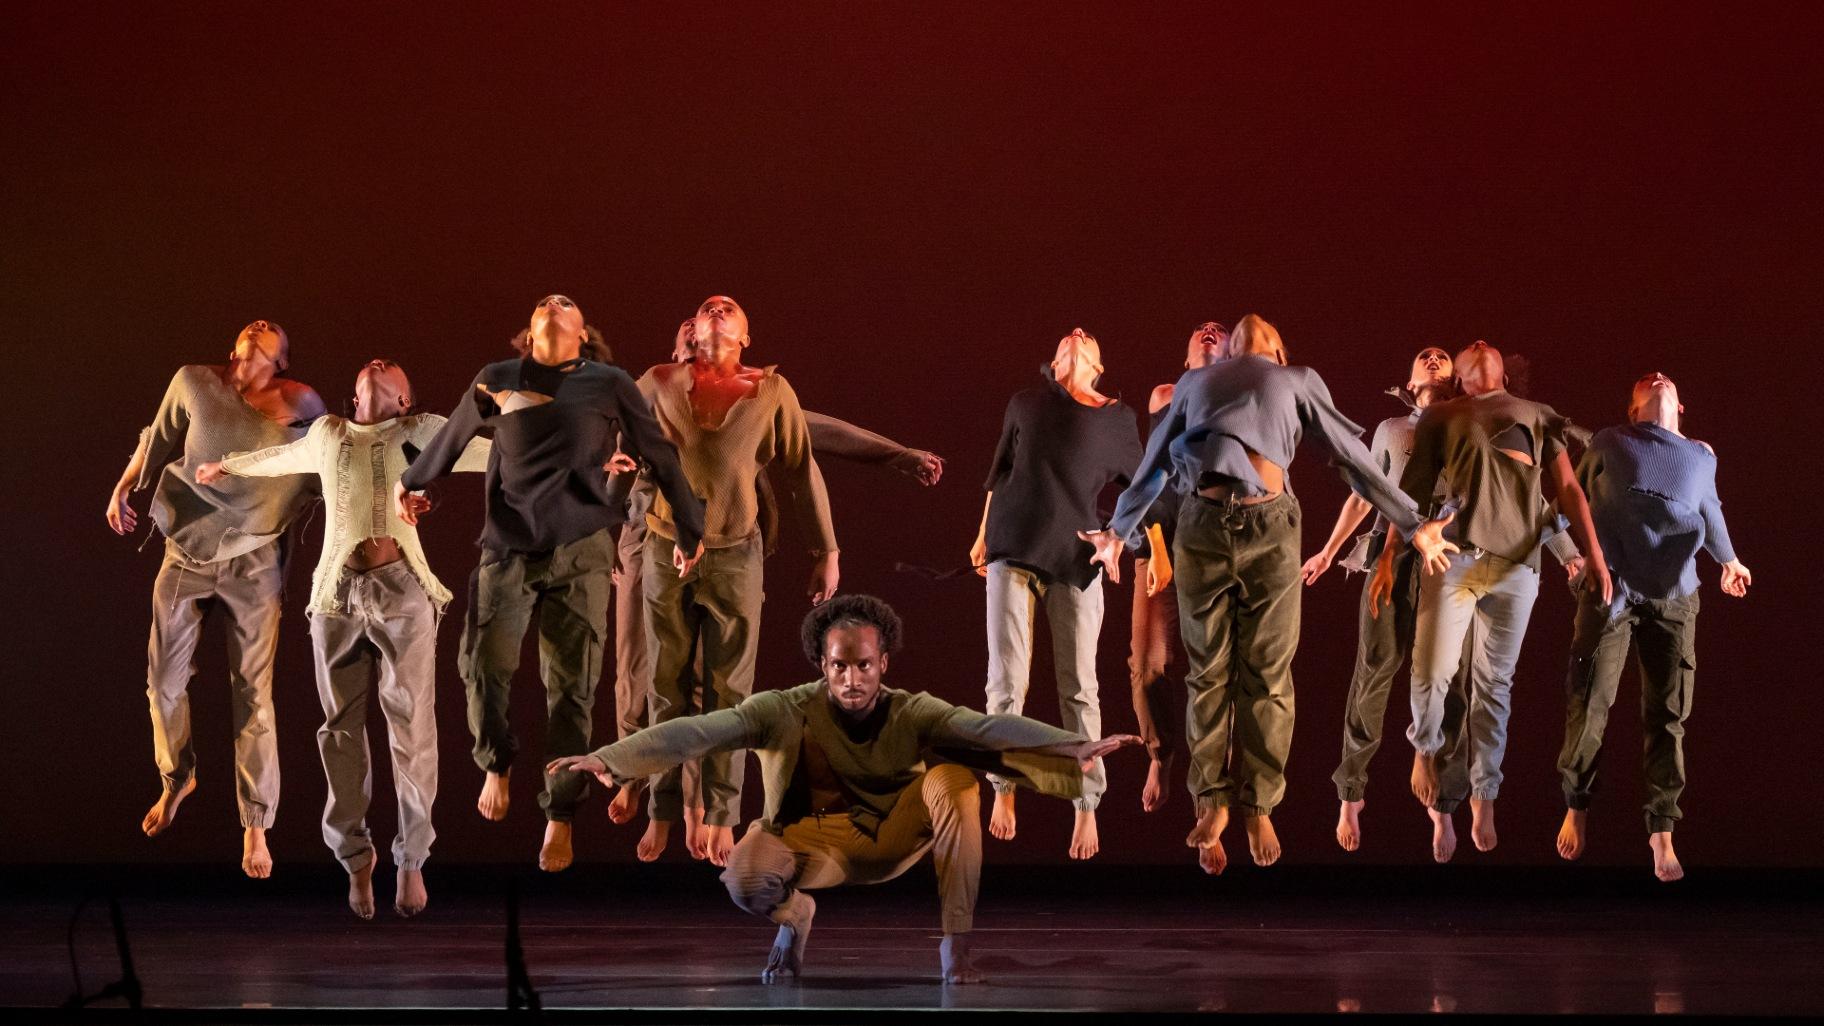 Deeply Rooted Dance Theater company and company apprentice members. (Todd Rosenberg)